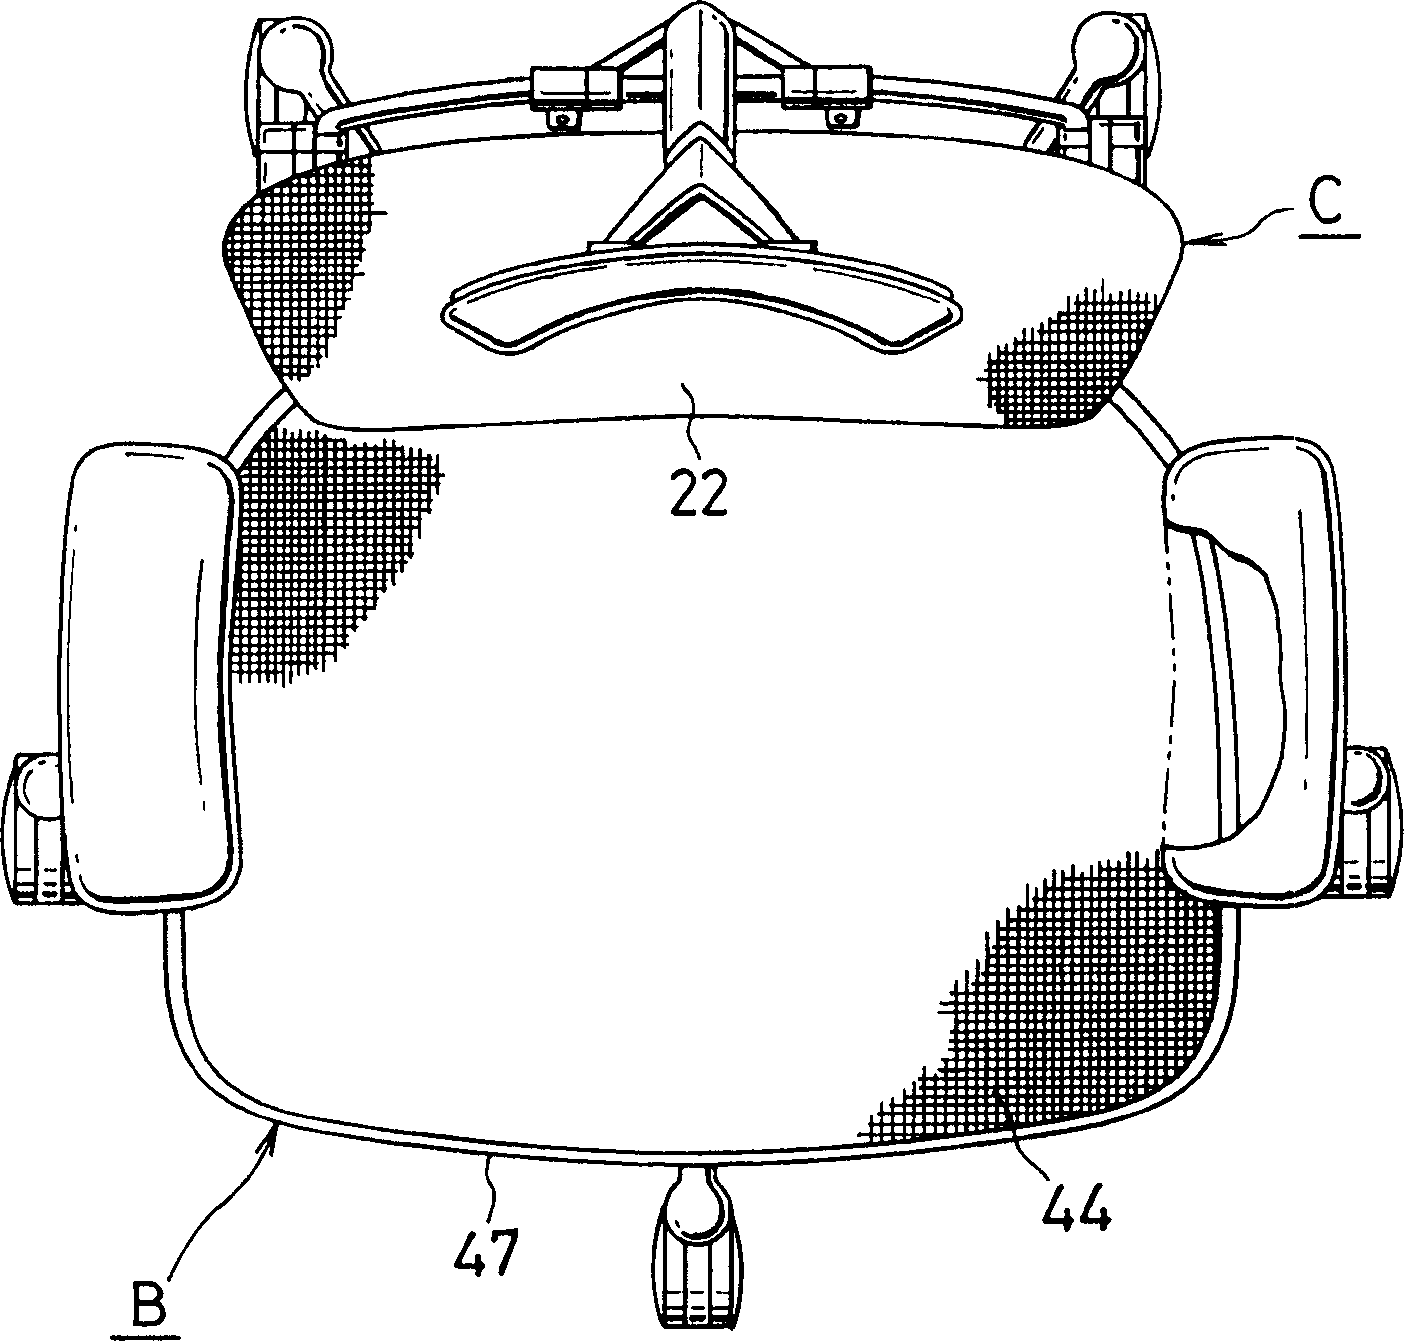 Construction for attaching net member to chair seat or backrest frame